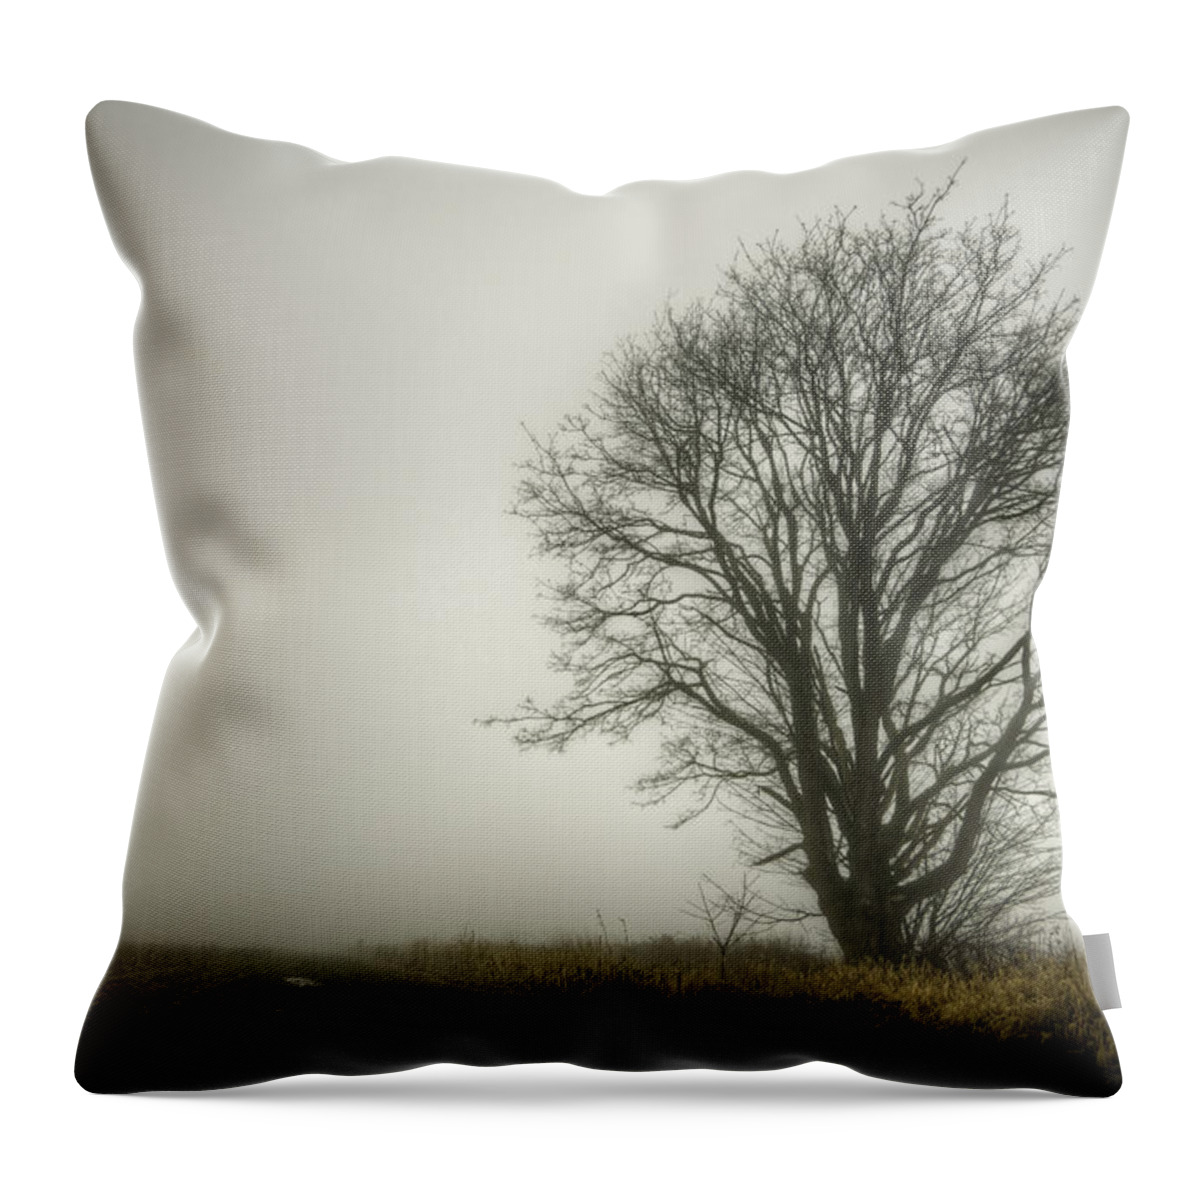 Tree Throw Pillow featuring the photograph Lonesome by Spencer McDonald